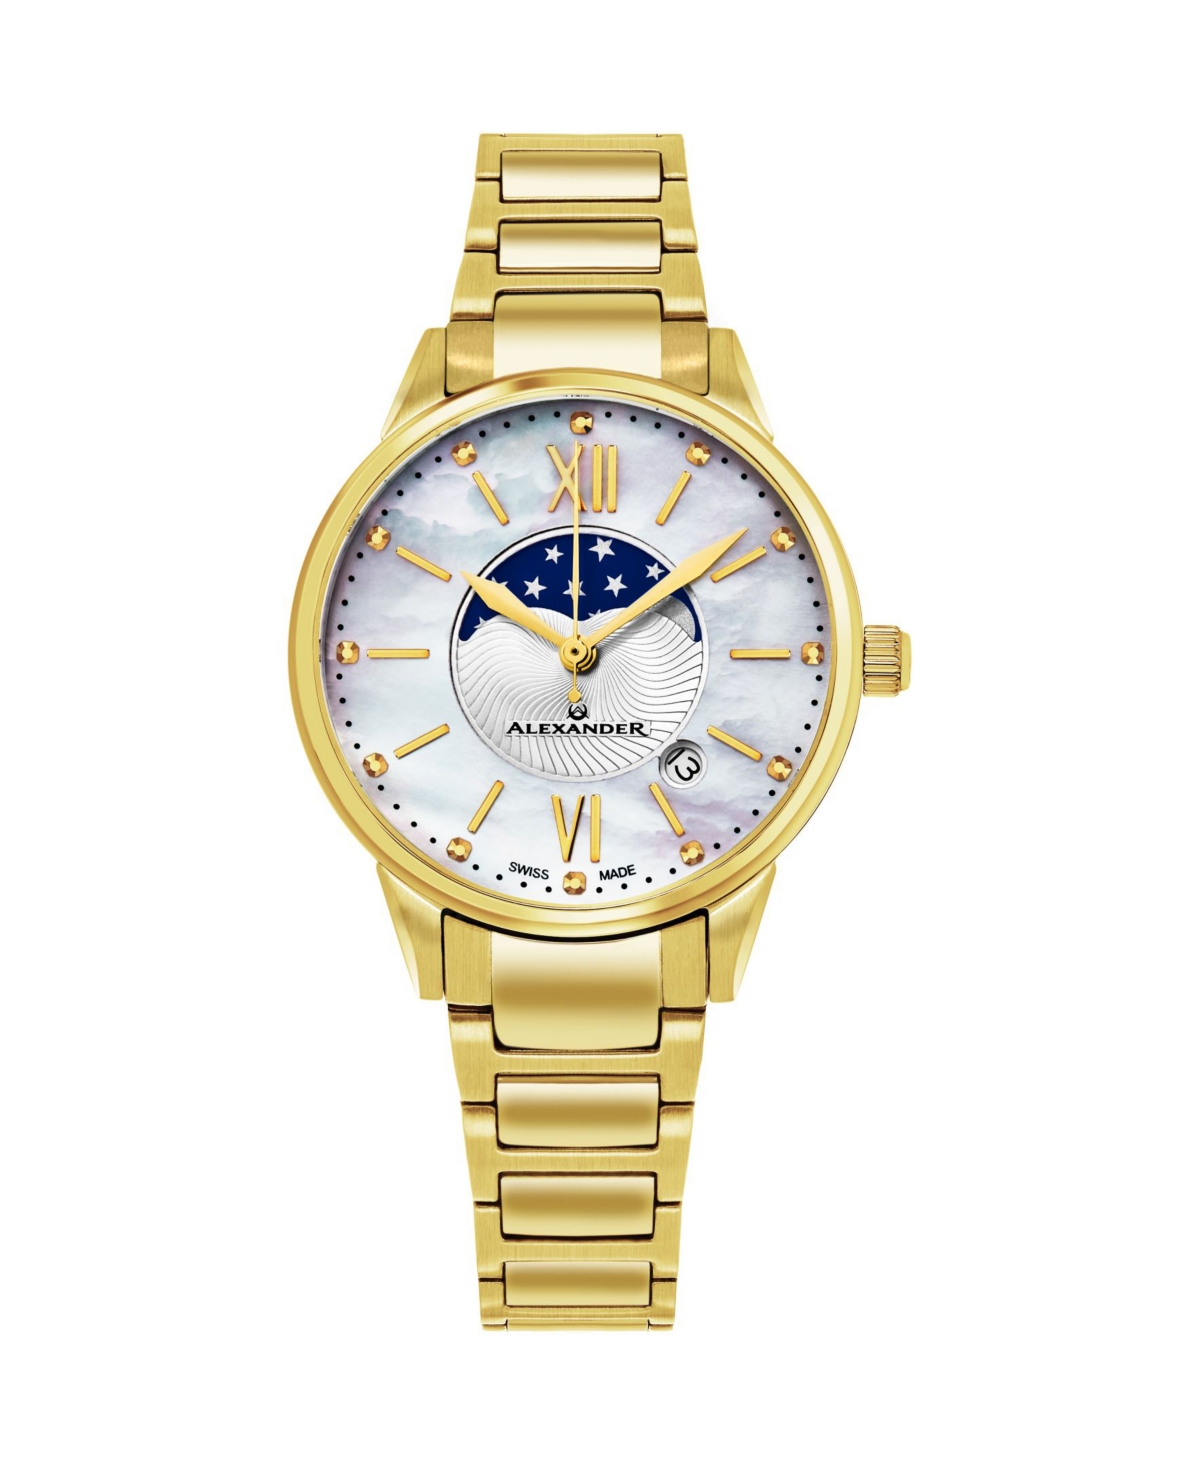 Alexander Watch A204B-05, Ladies Quartz Moonphase Date Watch with Yellow Gold Tone Stainless Steel Case on Yellow Gold Tone Stainless Steel Bracelet -